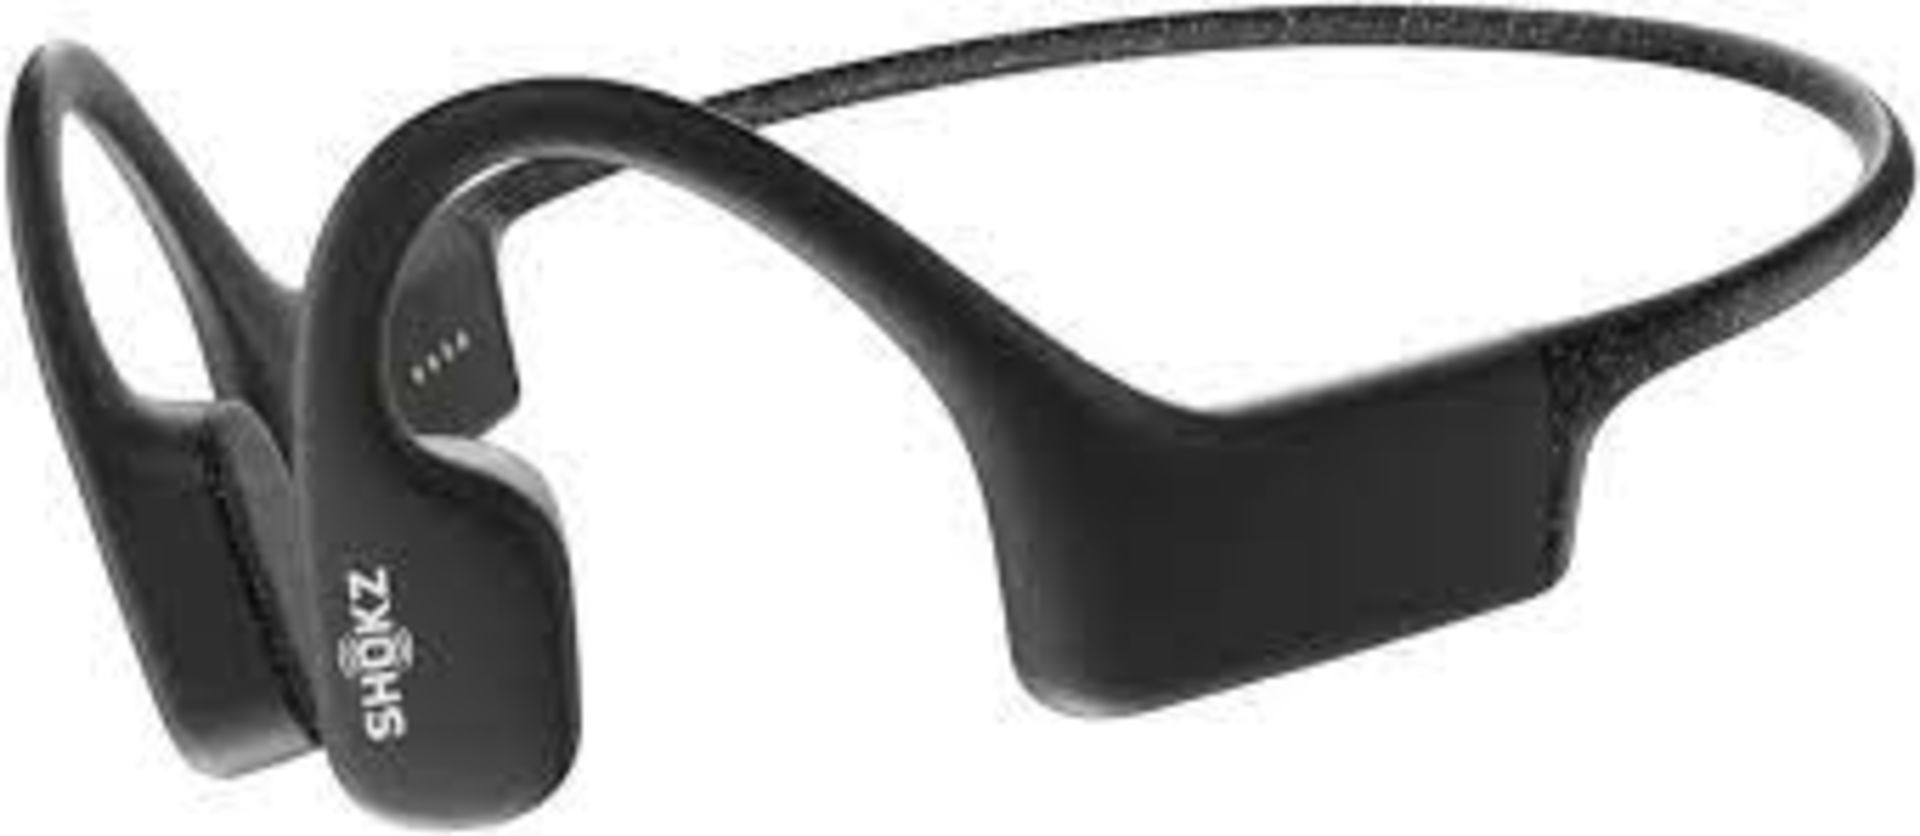 AFTERSHOKZ Xtrainerz Open-Ear MP3 Swimming Bone Conduction Headphones with 4GB memory. Black. RRP £